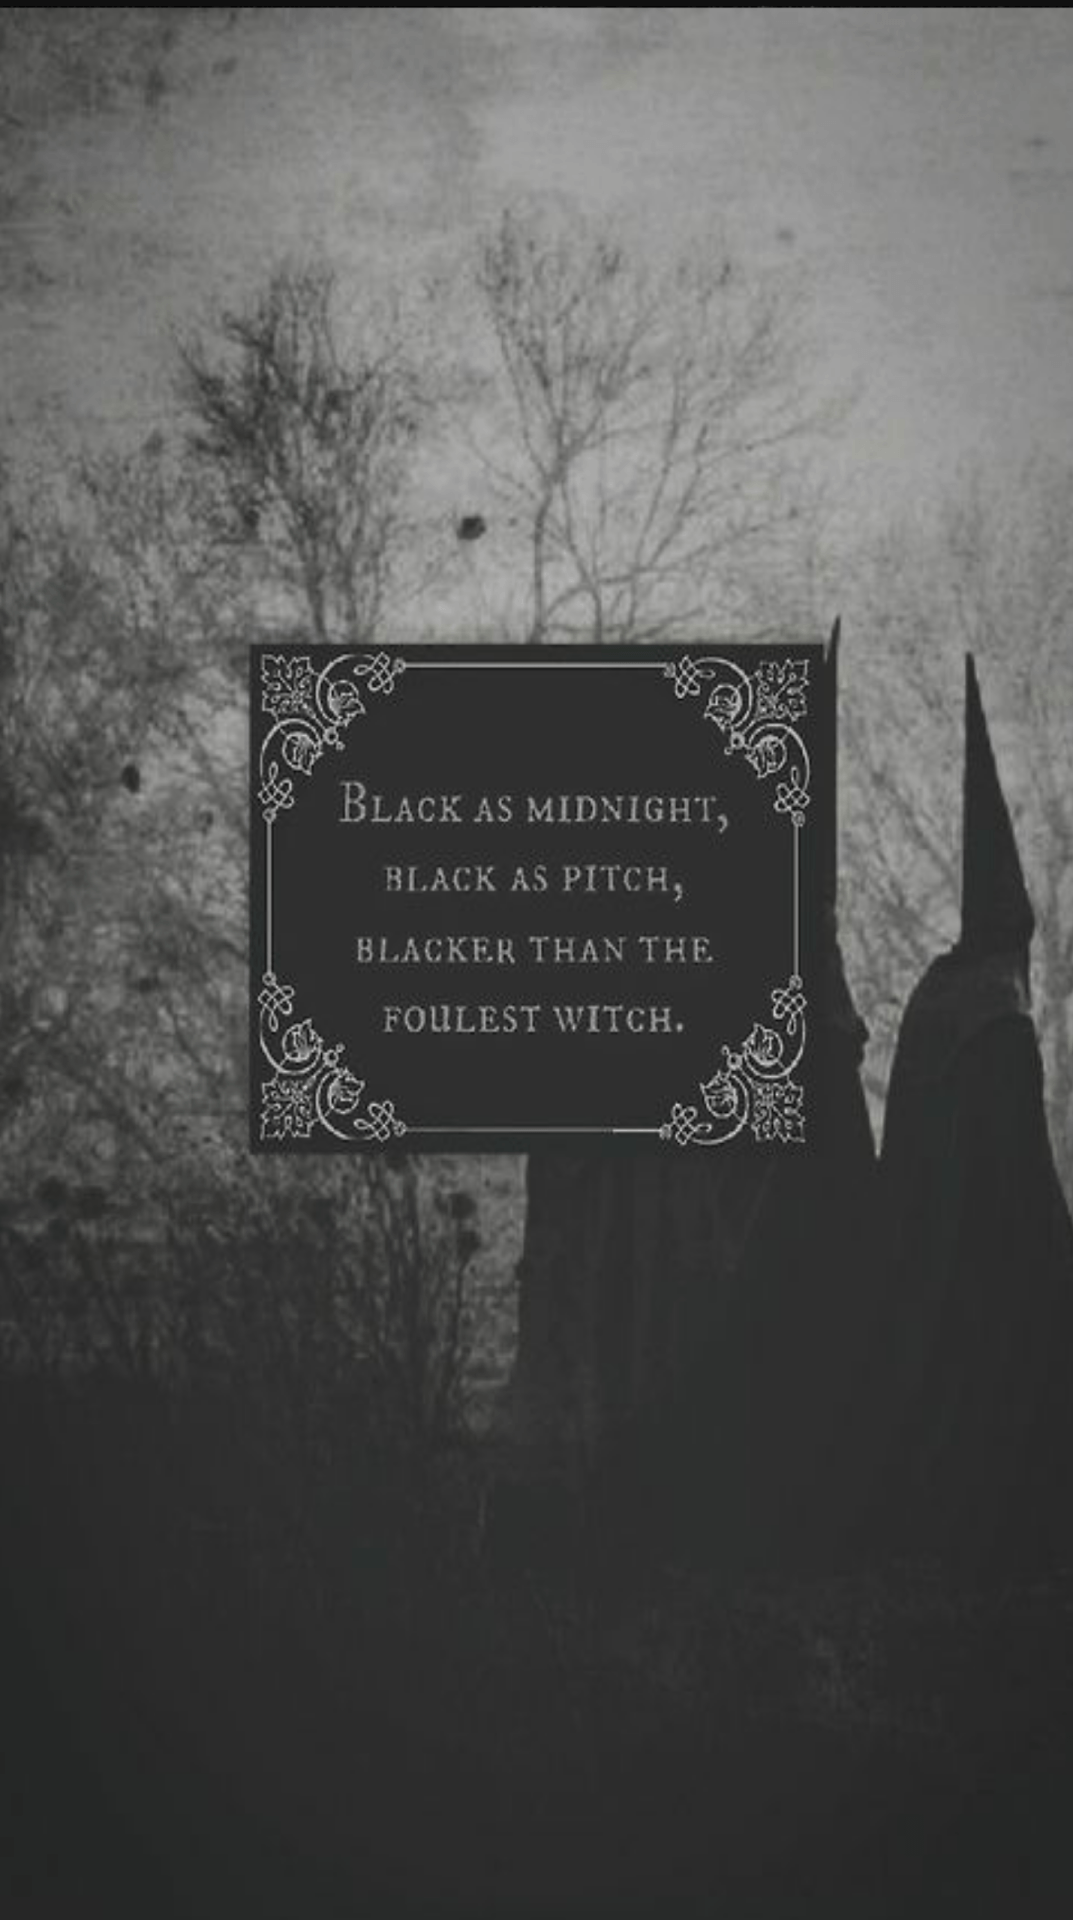 A witchy wallpaper I made Inspired by some posts on Pinterest   rWitchesVsPatriarchy